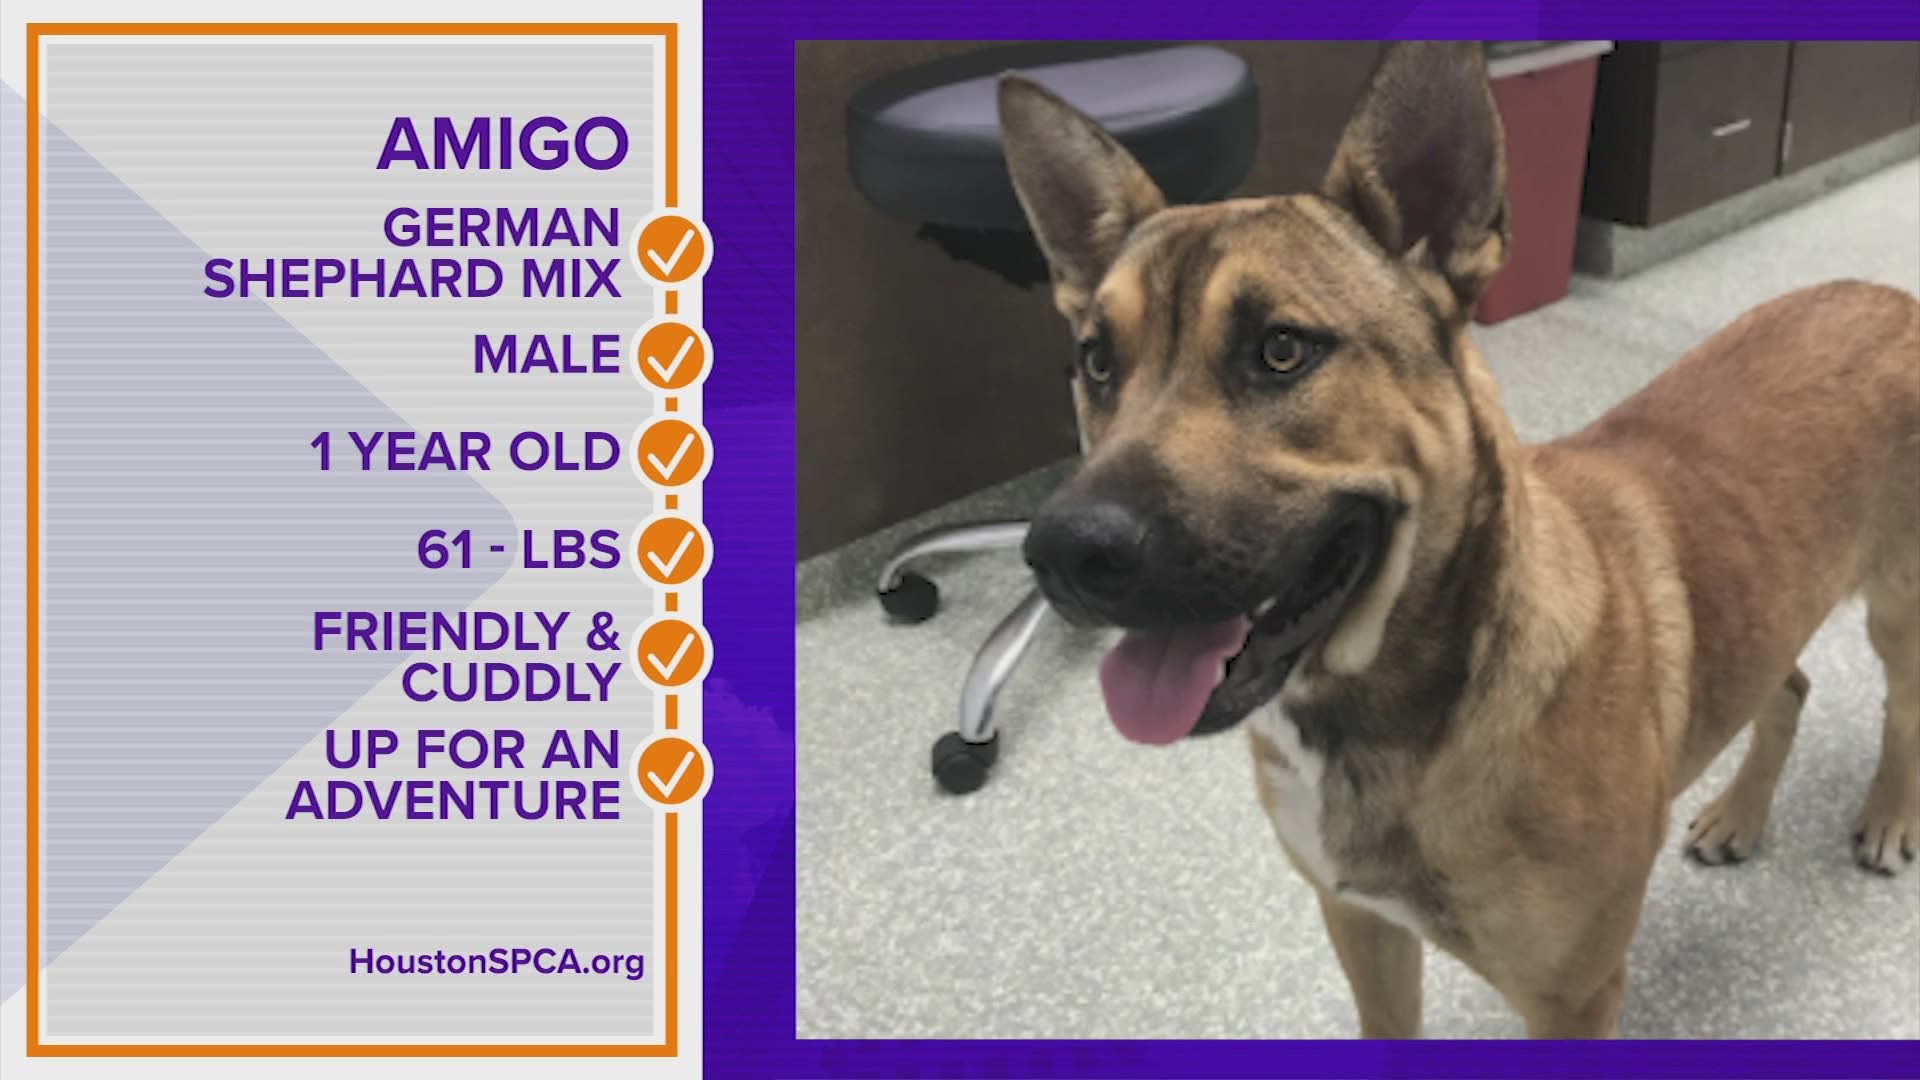 Meet Amigo, a 1-year-old German Shepherd mix available for adoption at the Houston SPCA.